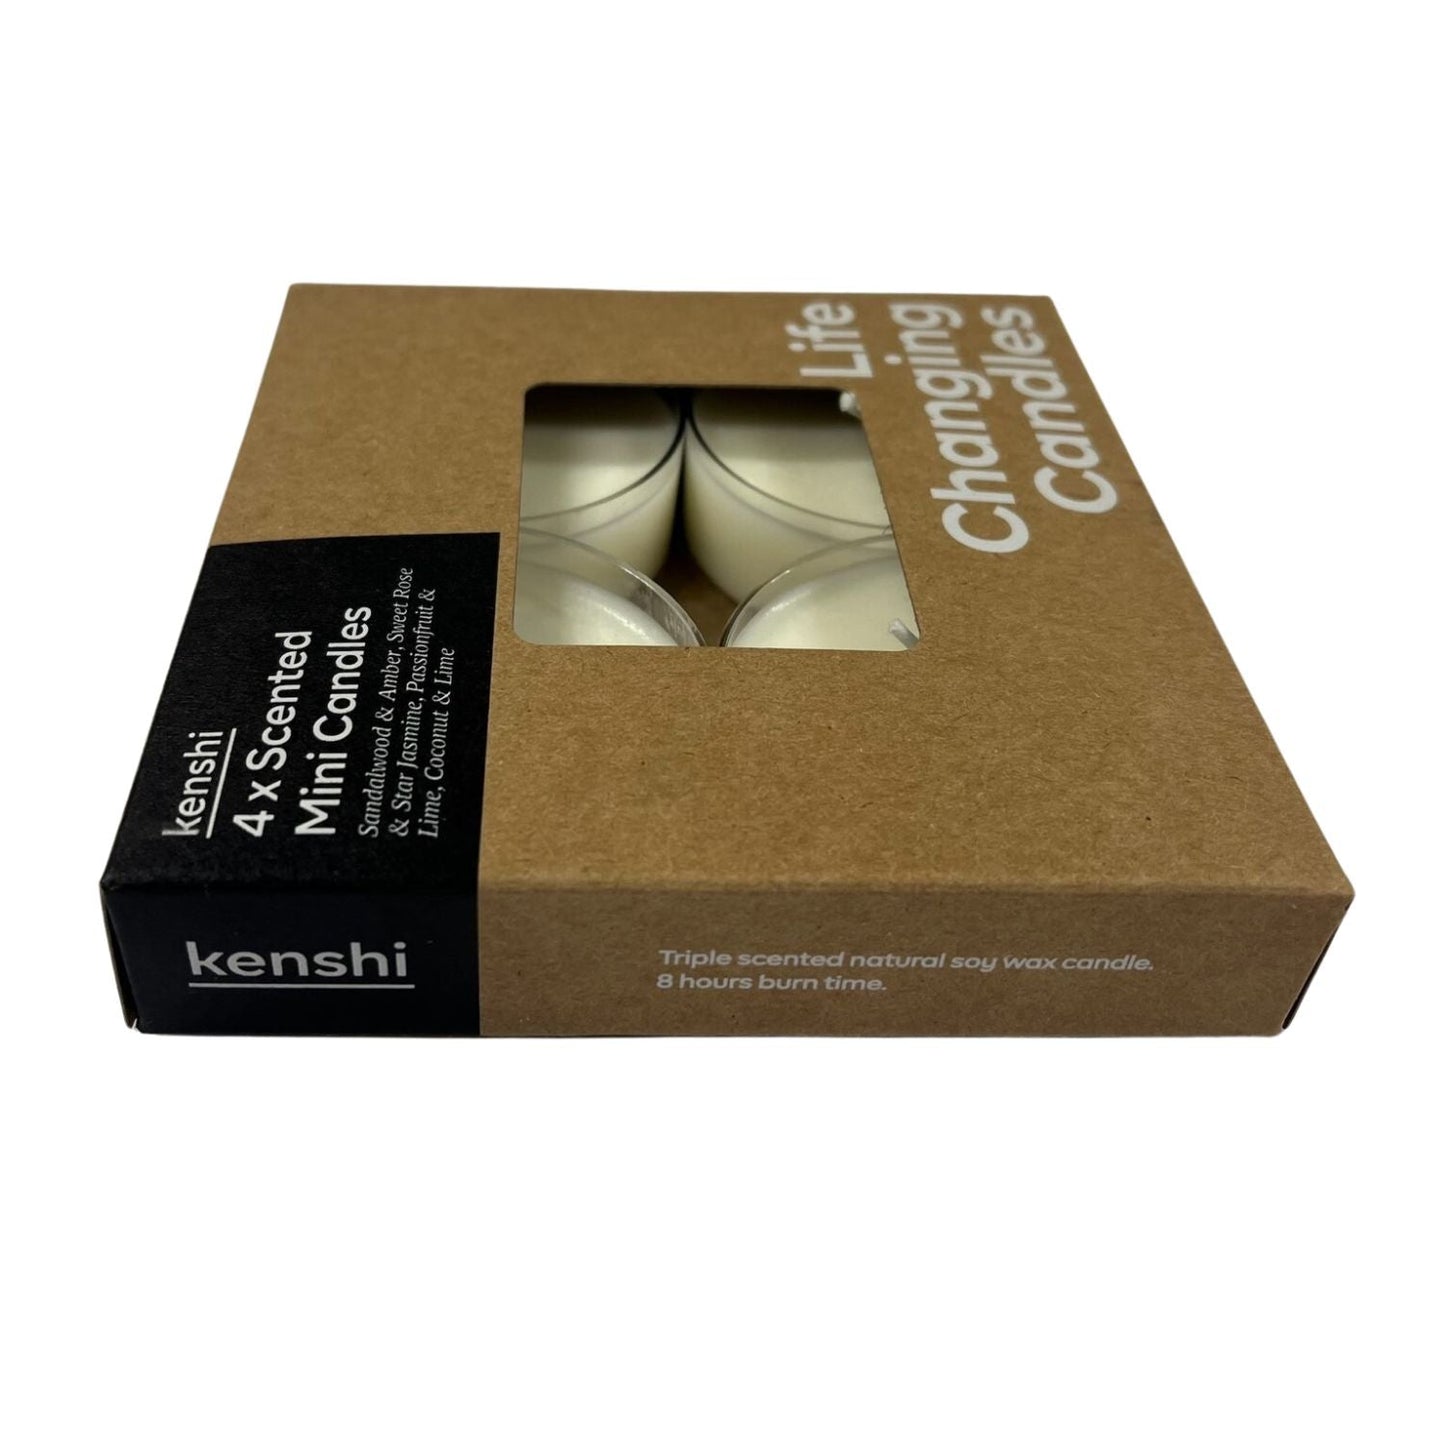 Pack of 4 Scented Mini Candles for Zimele